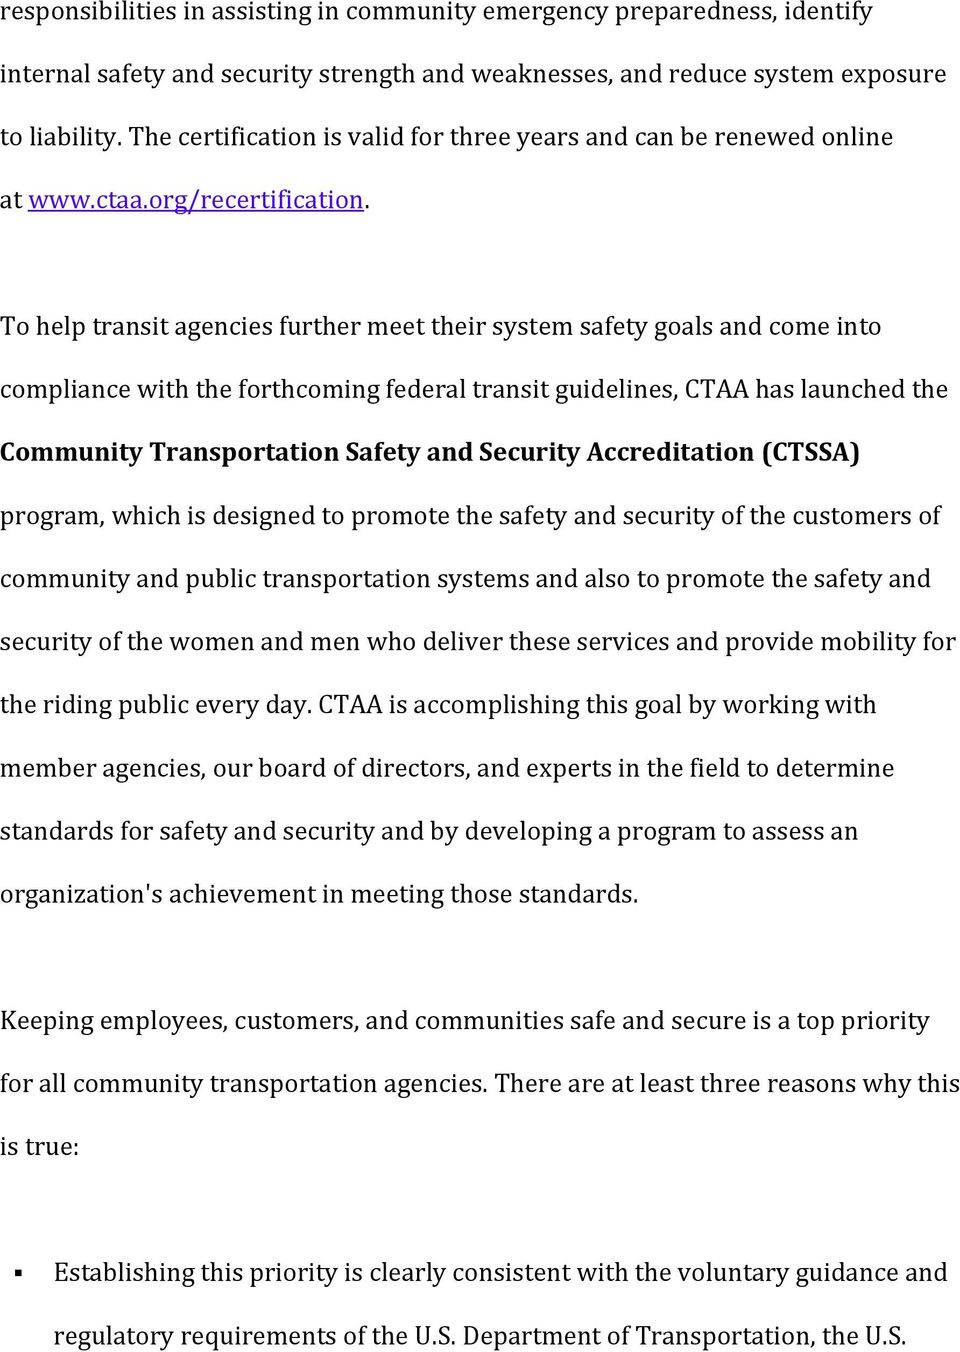 To help transit agencies further meet their system safety goals and come into compliance with the forthcoming federal transit guidelines, CTAA has launched the Community Transportation Safety and